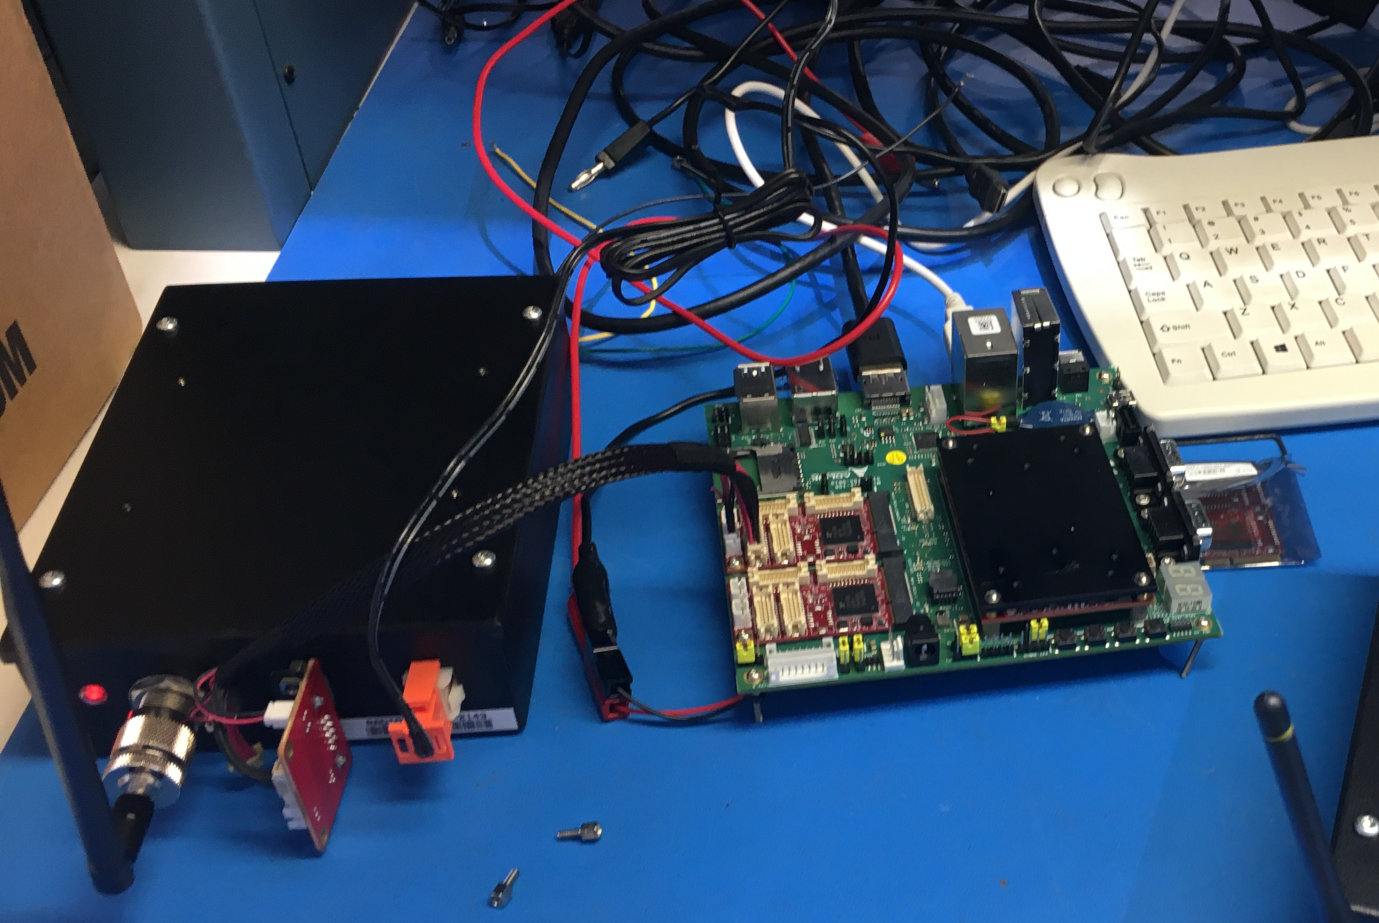 ICR-900 modem connected to Adlink carrier board and Osprey on test bench.